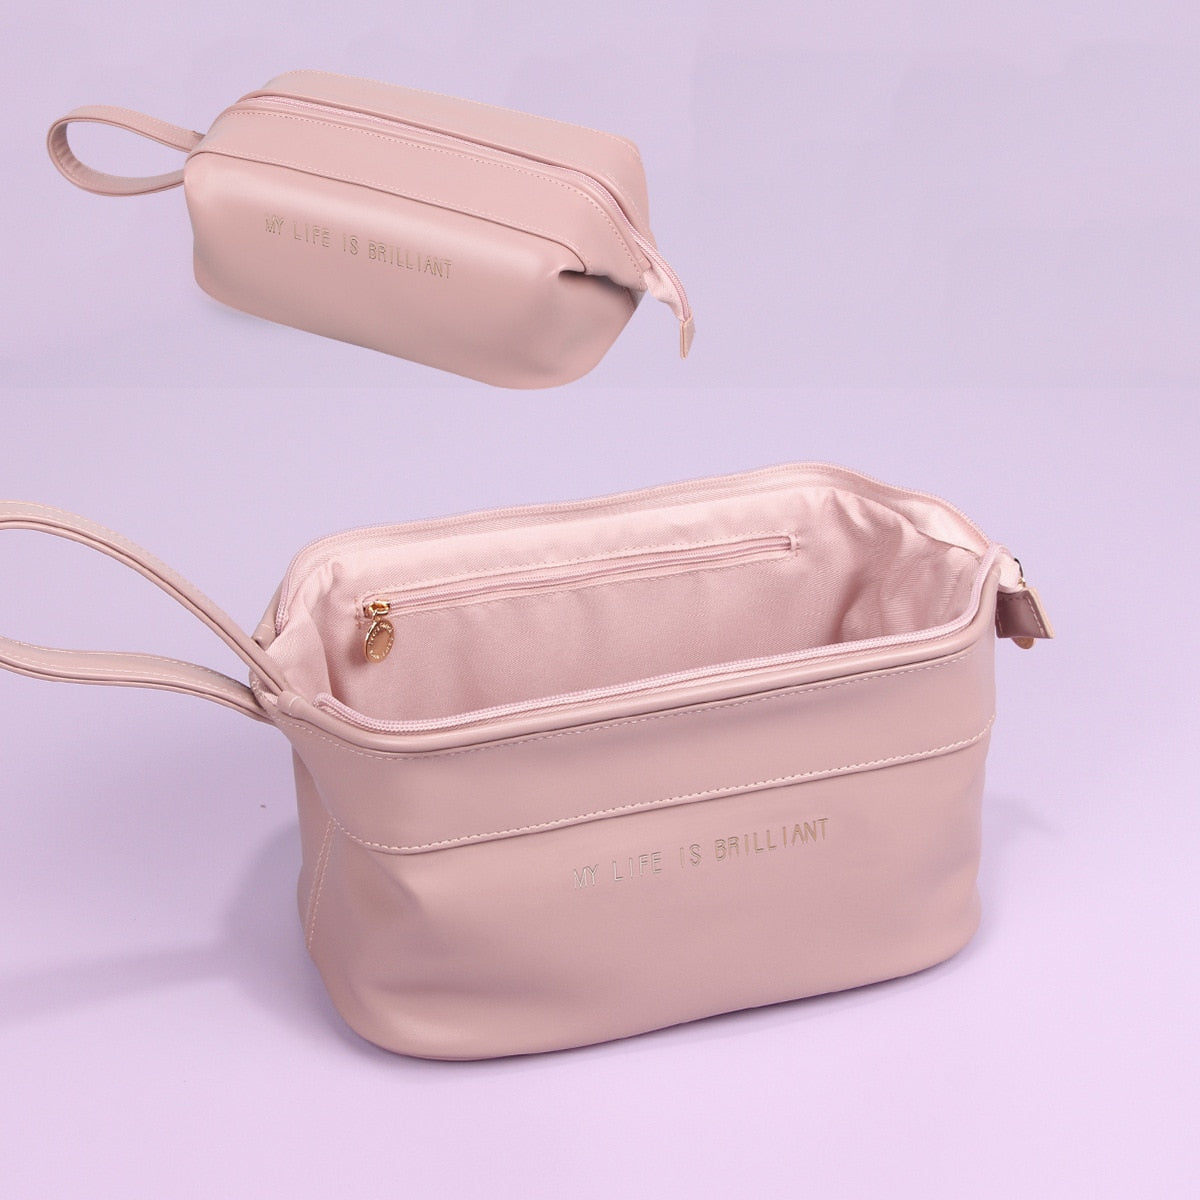 A new 2022 travel toiletry bag with large capacity and portability